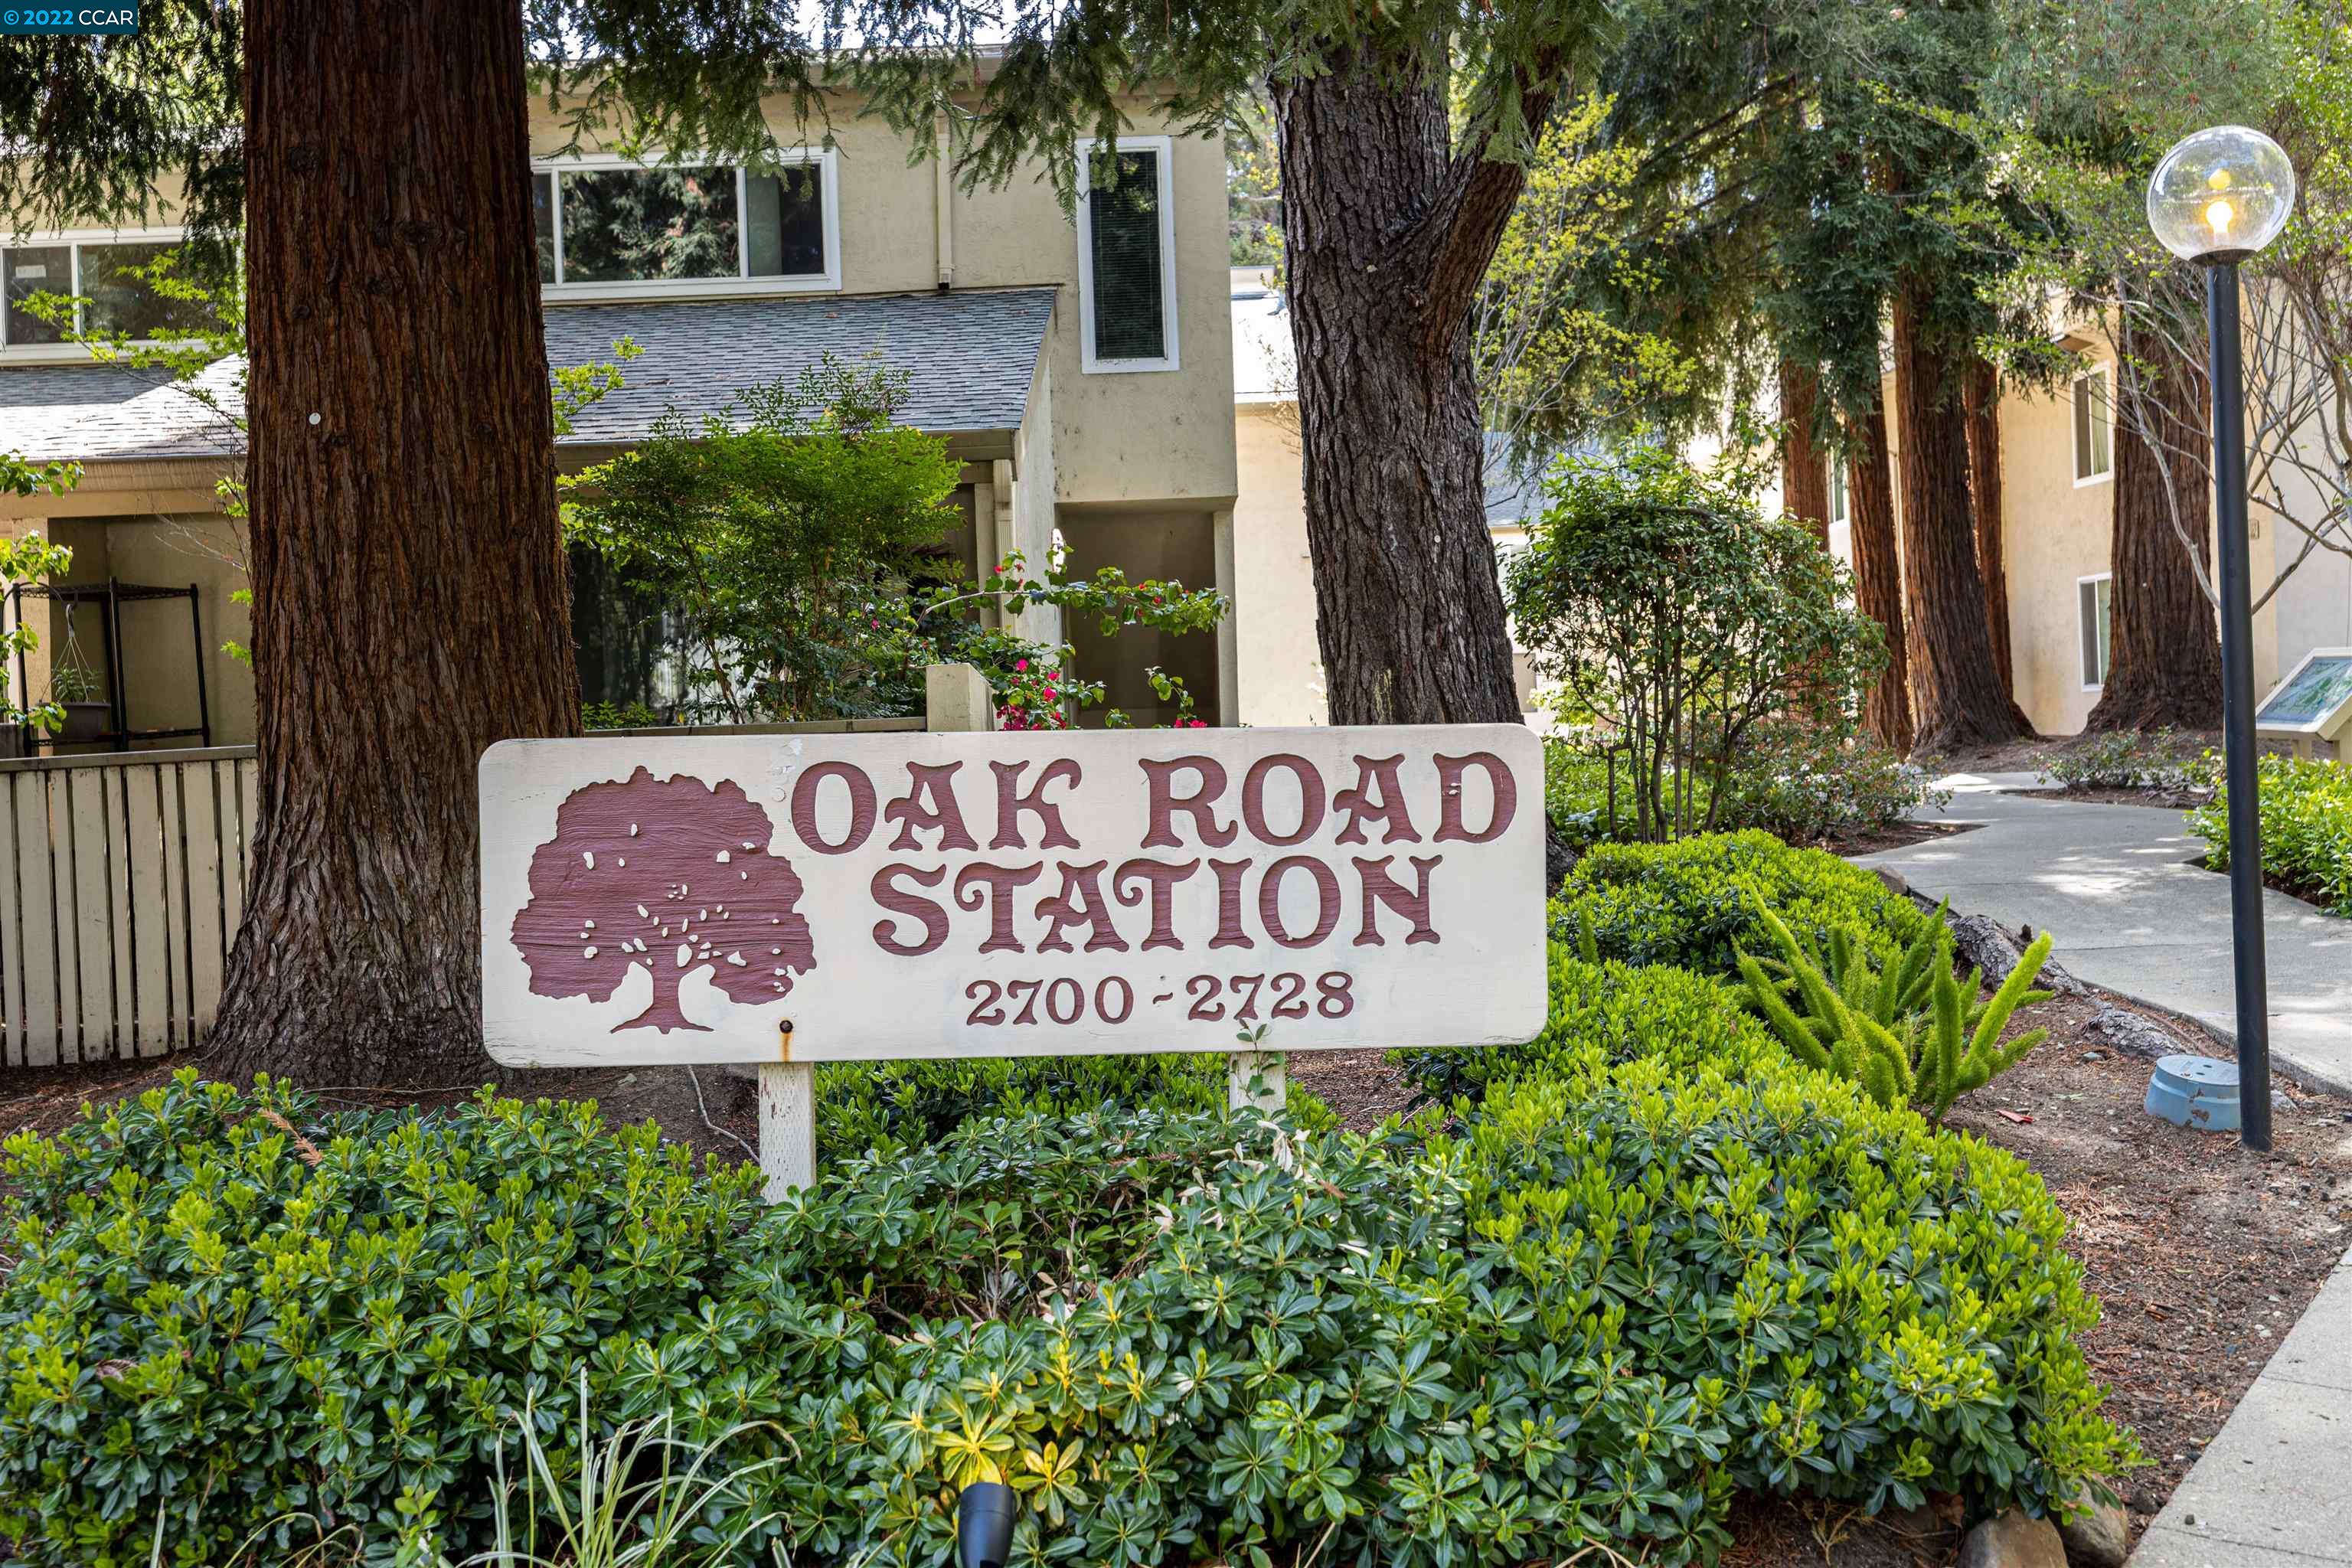 Desired Oak Rd Station in Walnut Creek. Vaulted open wood beam ceilings with redwoods outside make this PRIVATE 2 bedroom condo feel like a cabin style treehouse. Stylish kitchen updated with quartz counters, induction cooktop, s.s. appliances & cafe bar pass through with seating is perfect for entertaining. Serene treetop views from dining & living areas. Access deck for outside dining in nature. Wood lam. plank flooring with designer slate tile flooring in kitchen & bath. Spacious bdrms both with plantation shutters; one with walk-in closet the other a wall of closet doors. Bathroom layout provides a sink vanity with corian countertop separate from the shower/tub/toilet. Secondary spacious walk-in closet or dressing room also featured off the hall. Addt'l storage in deck closet, easy access to covered parking space. Pool, laundry & clubhouse! Steps to the CC Canal Trail & Walden Park. Just minutes to BART, downtown Walnut Creek, shopping & dining. OPEN HOUSE SUNDAY May 22nd - 1-4pm